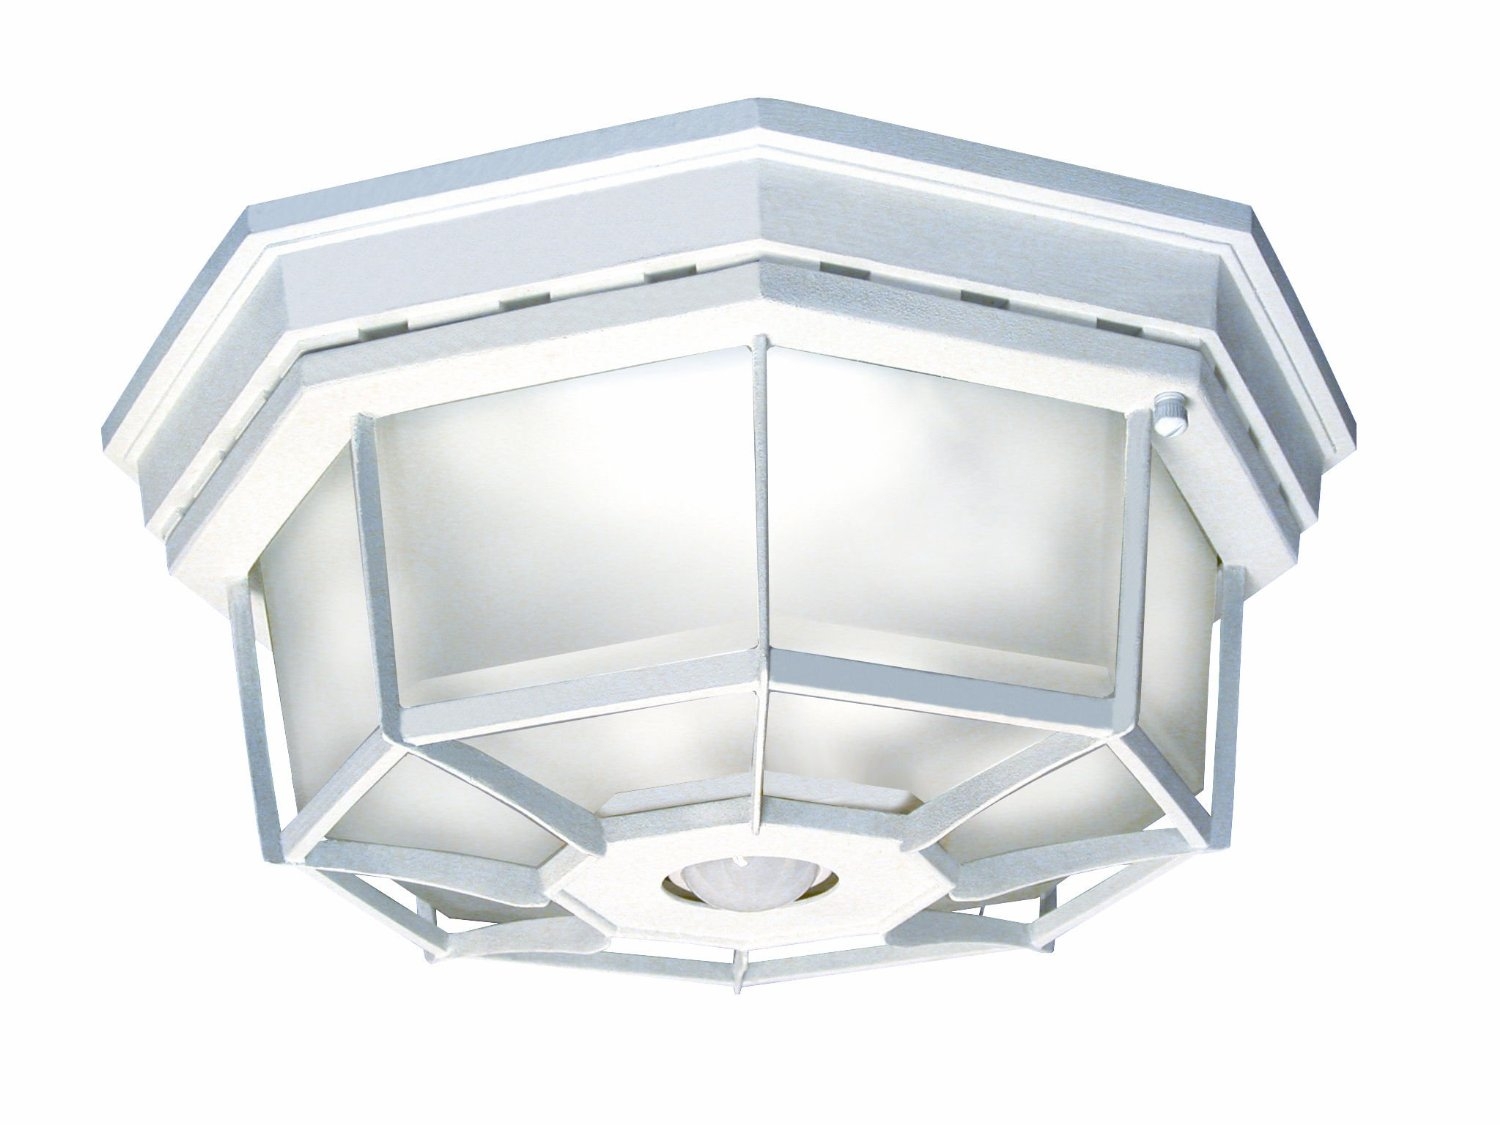 Permalink to Motion Activated Ceiling Light Fixture